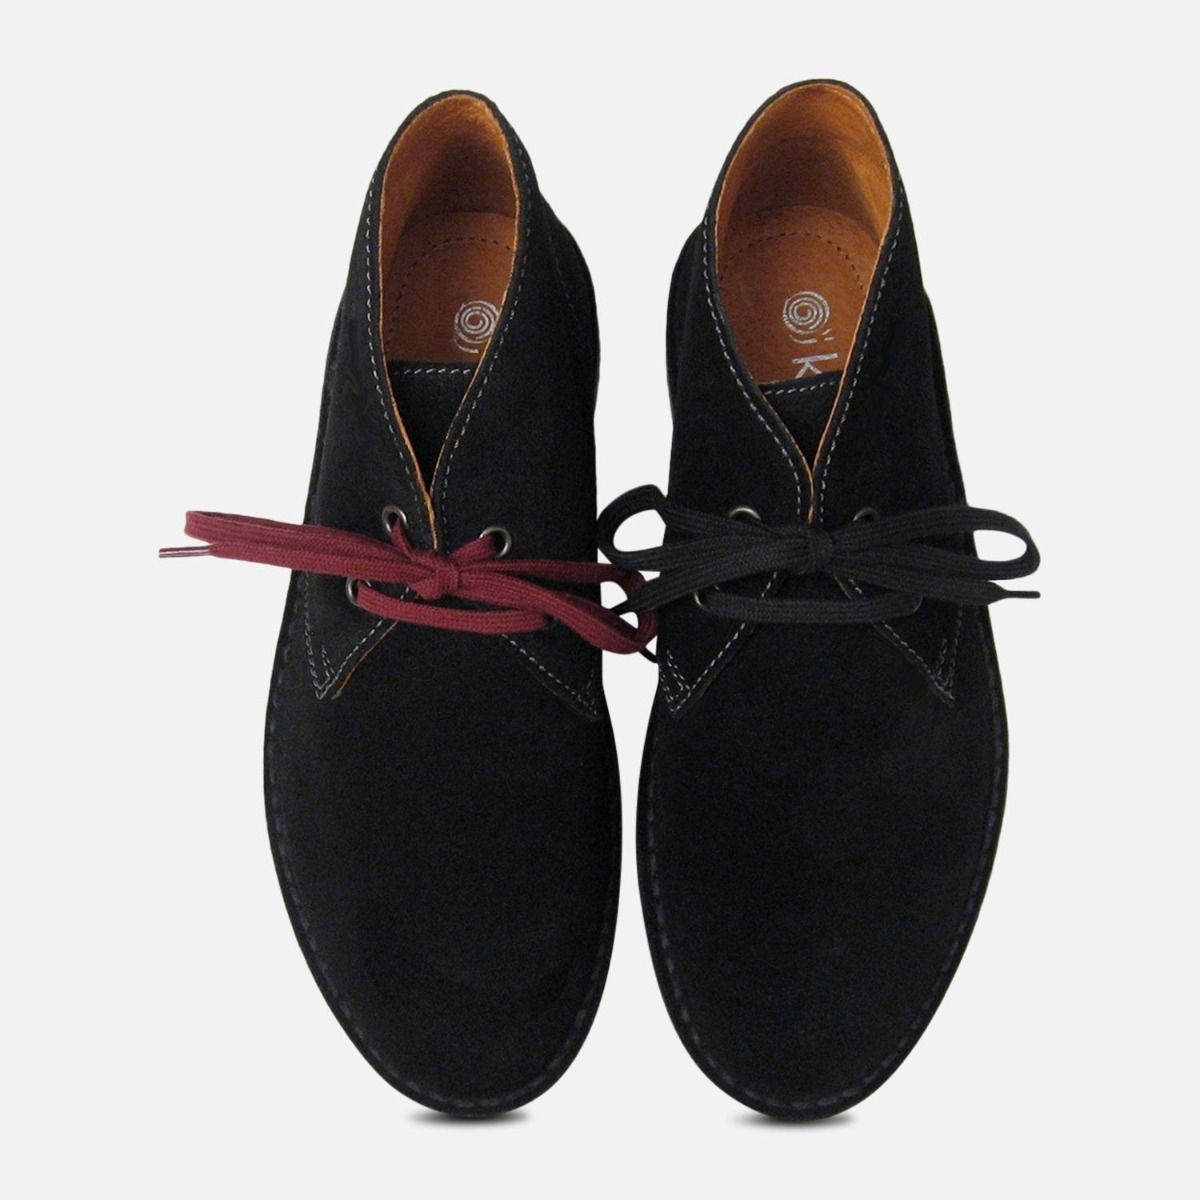 Details about   Ladies Black Suede Kebo Italian Desert Boots 